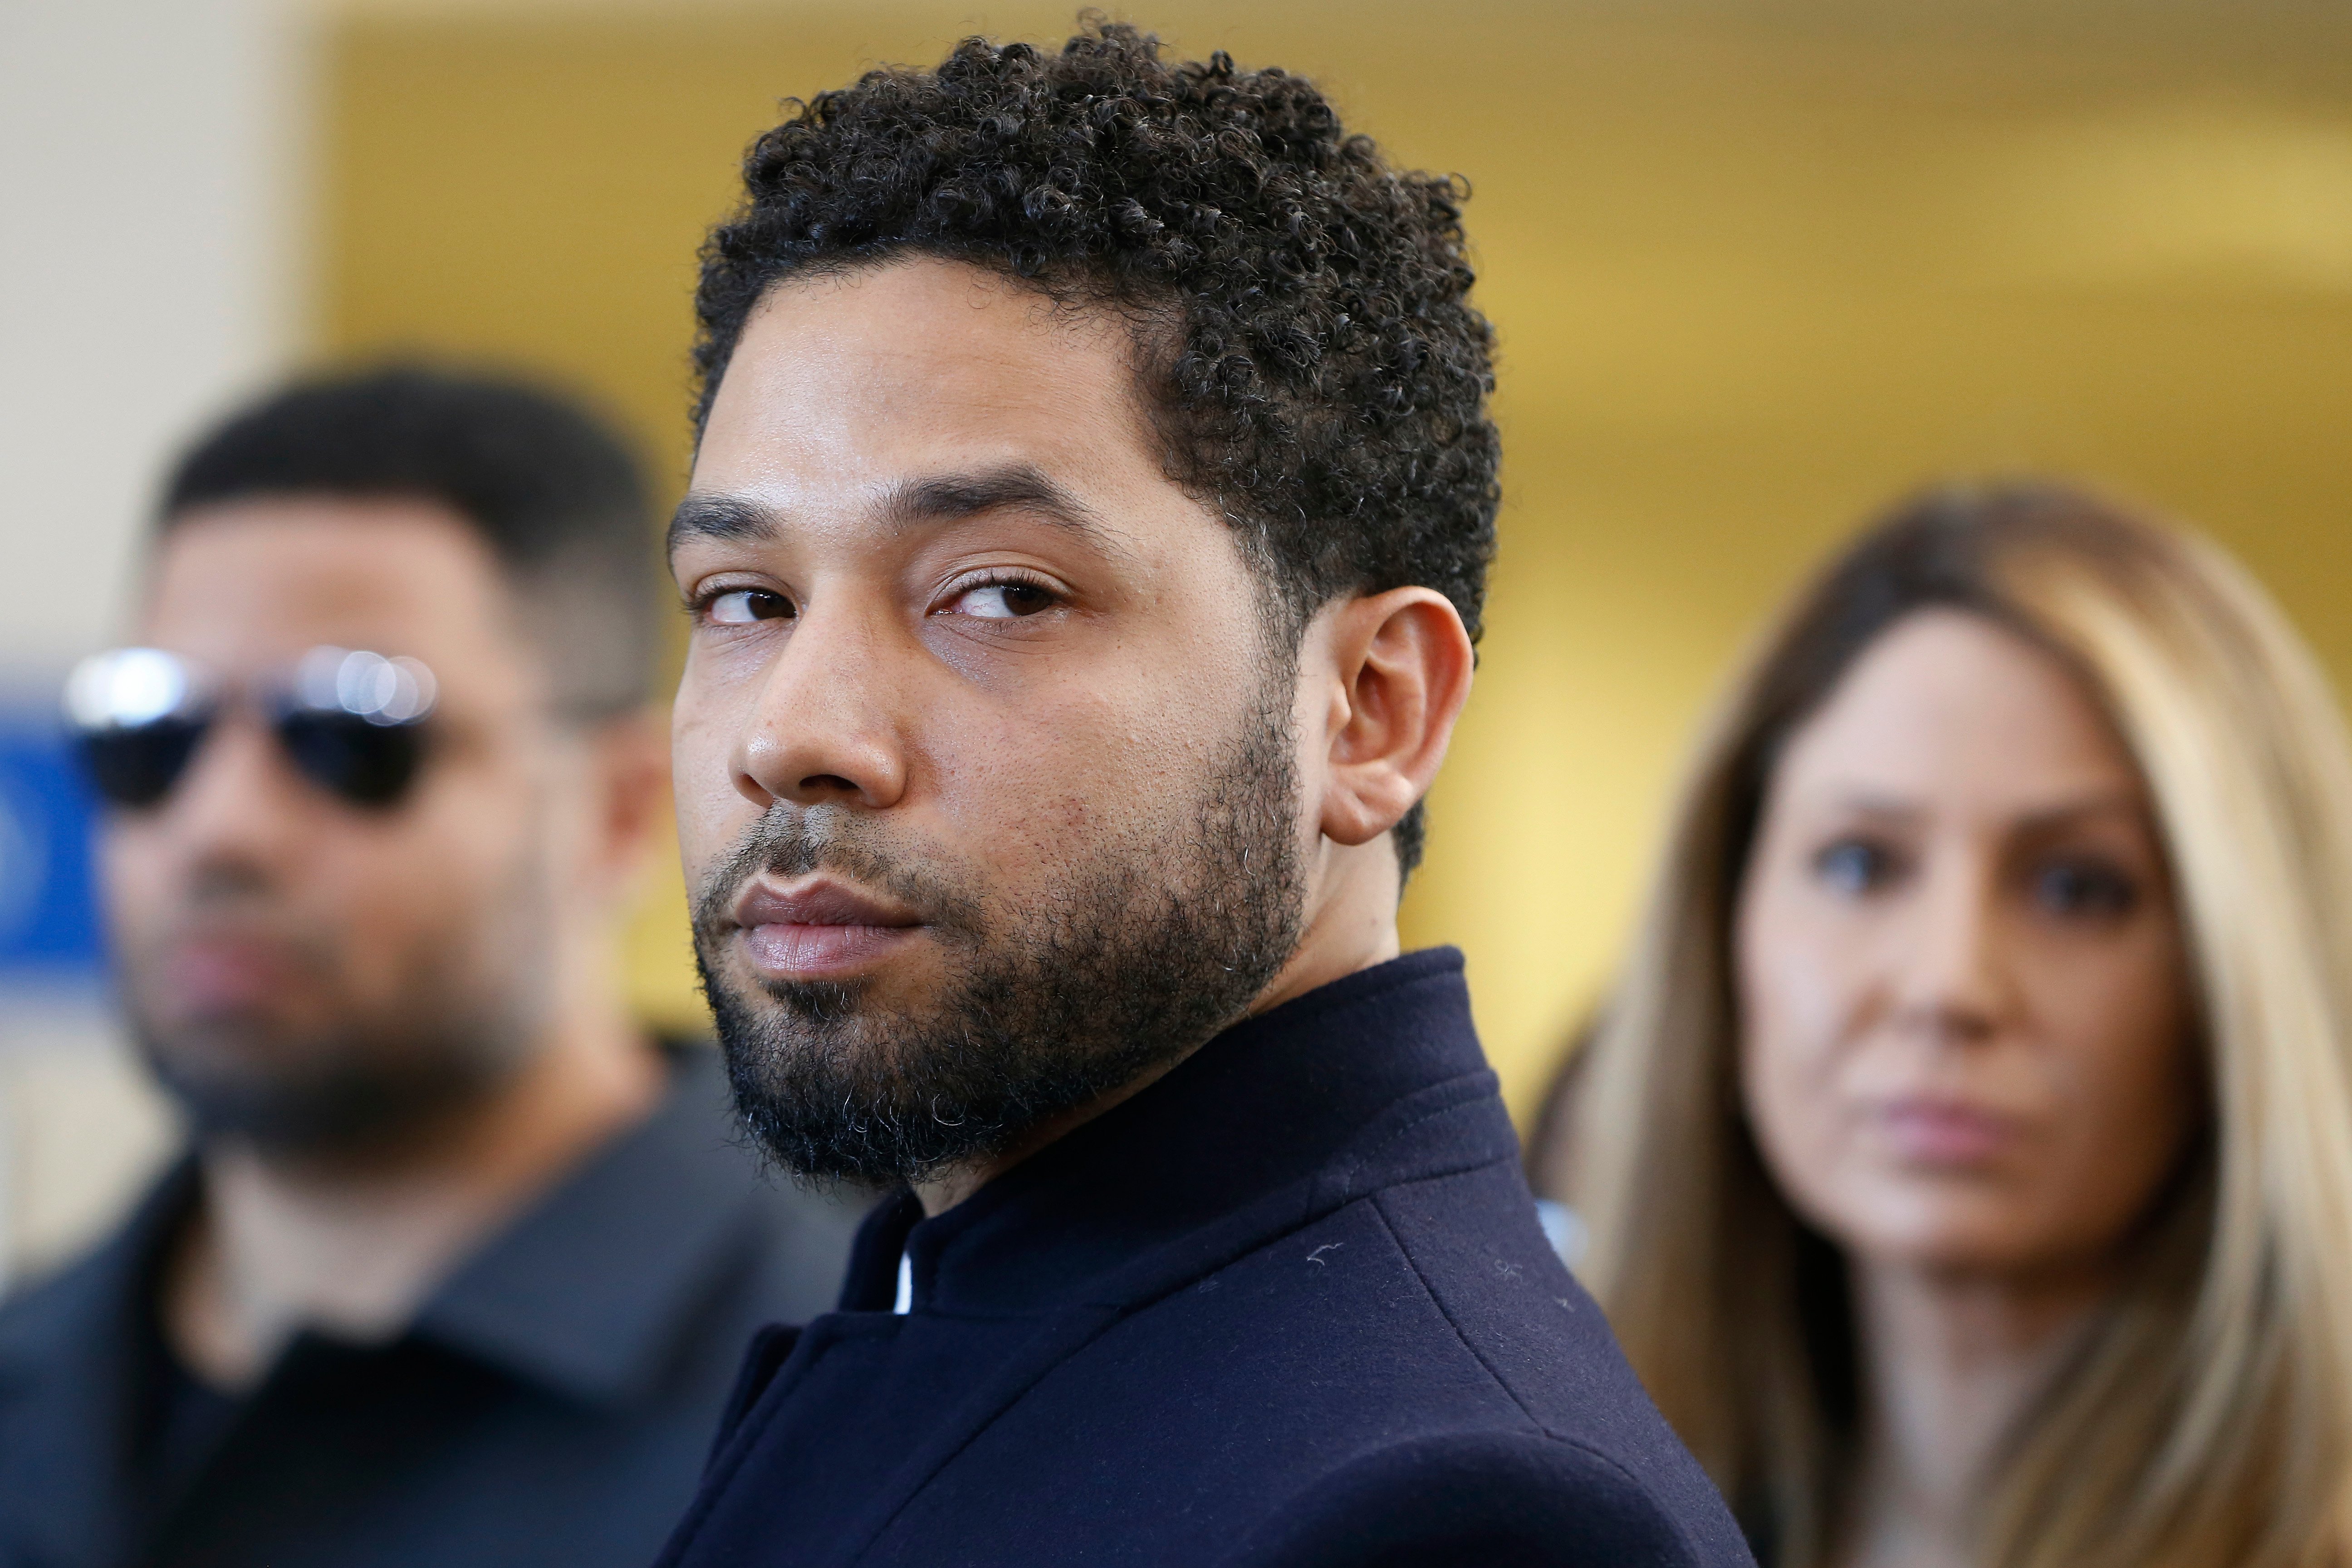 CHICAGO, ILLINOIS - MARCH 26: Actor Jussie Smollett after his court appearance at Leighton Courthouse on March 26, 2019 in Chicago, Illinois. This morning in court it was announced that all charges were dropped against the actor. (Photo by Nuccio DiNuzzo/Getty Images)